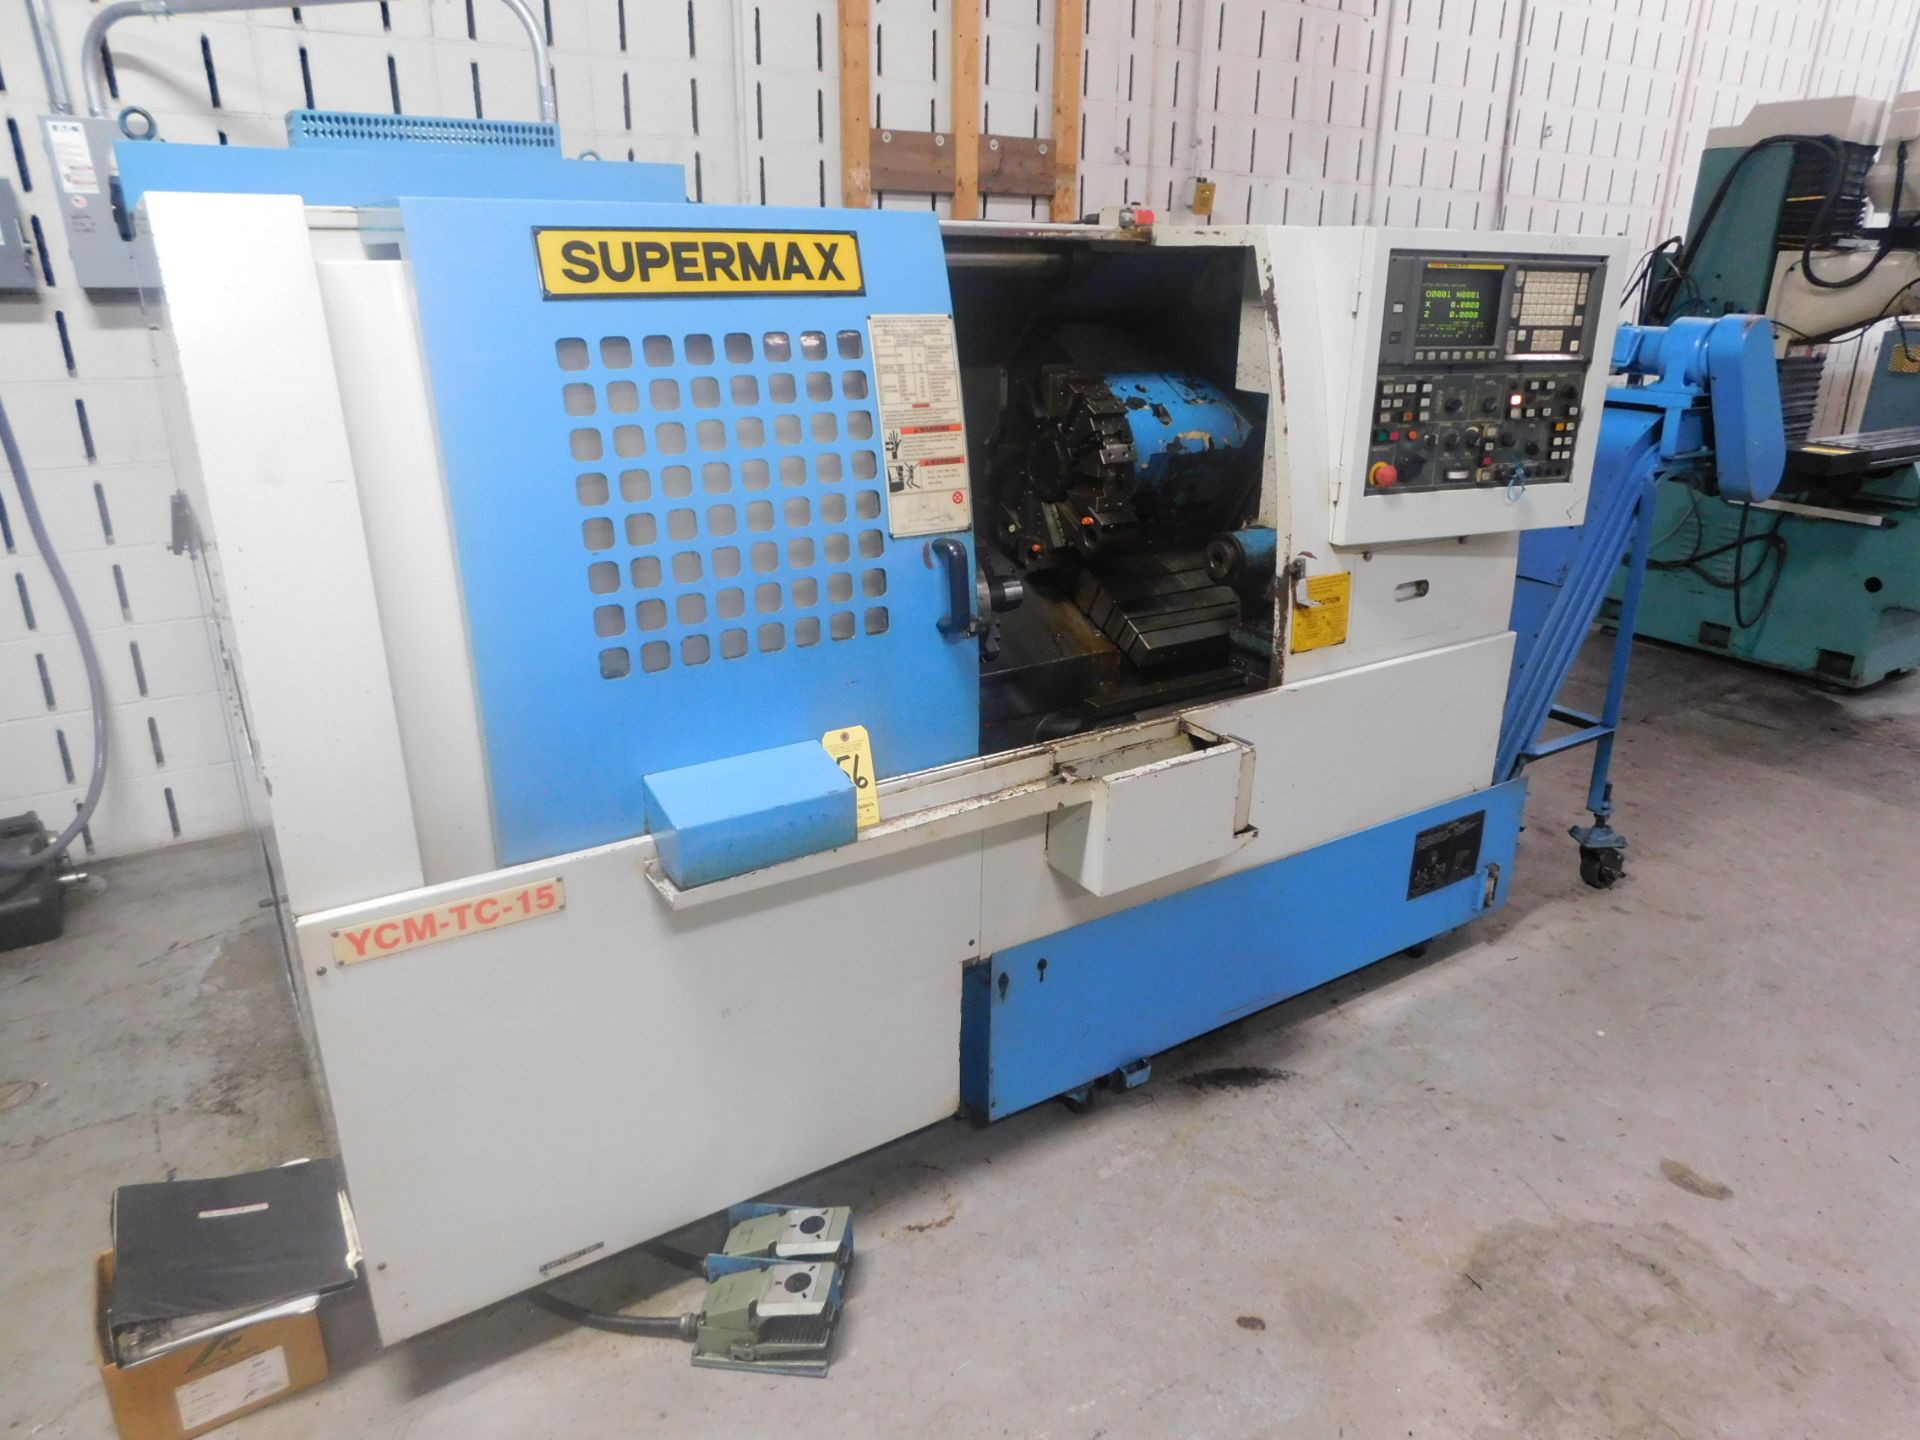 Supermax Model YCM-TC-15 CNC Turning Center, SN 025028, with Fanuc Series O-T CNC Control, 8" 3- - Image 2 of 13